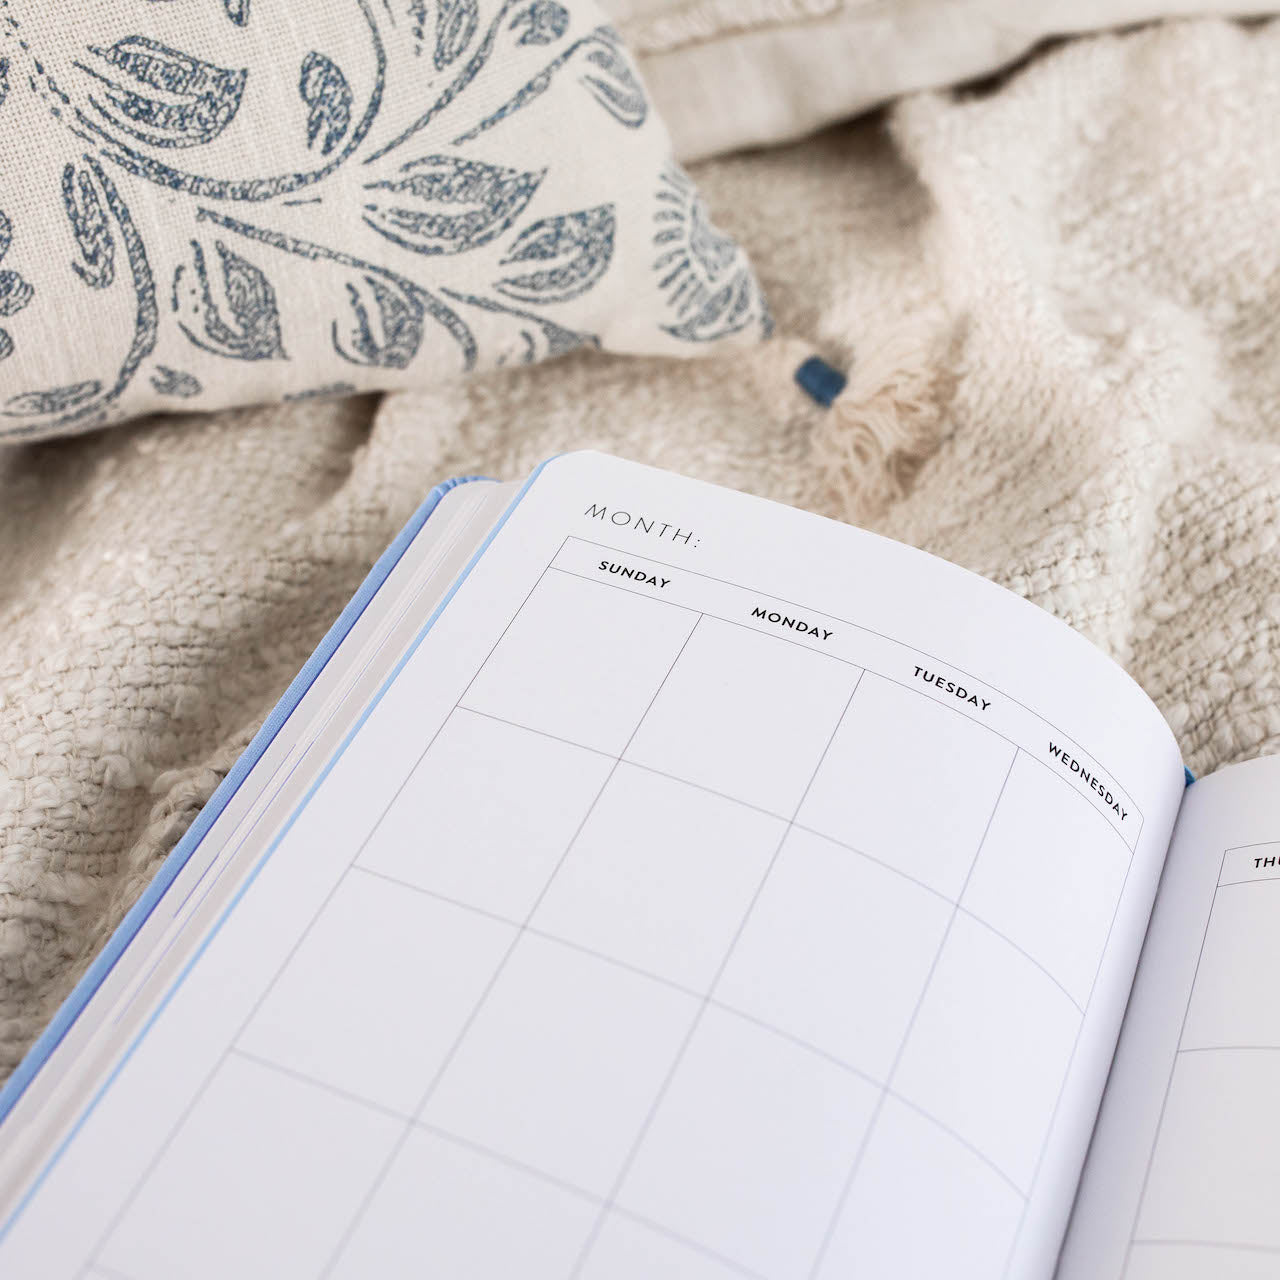  90-Day PowerSheets® Goal Planner by Cultivate Cultivate Perfumarie